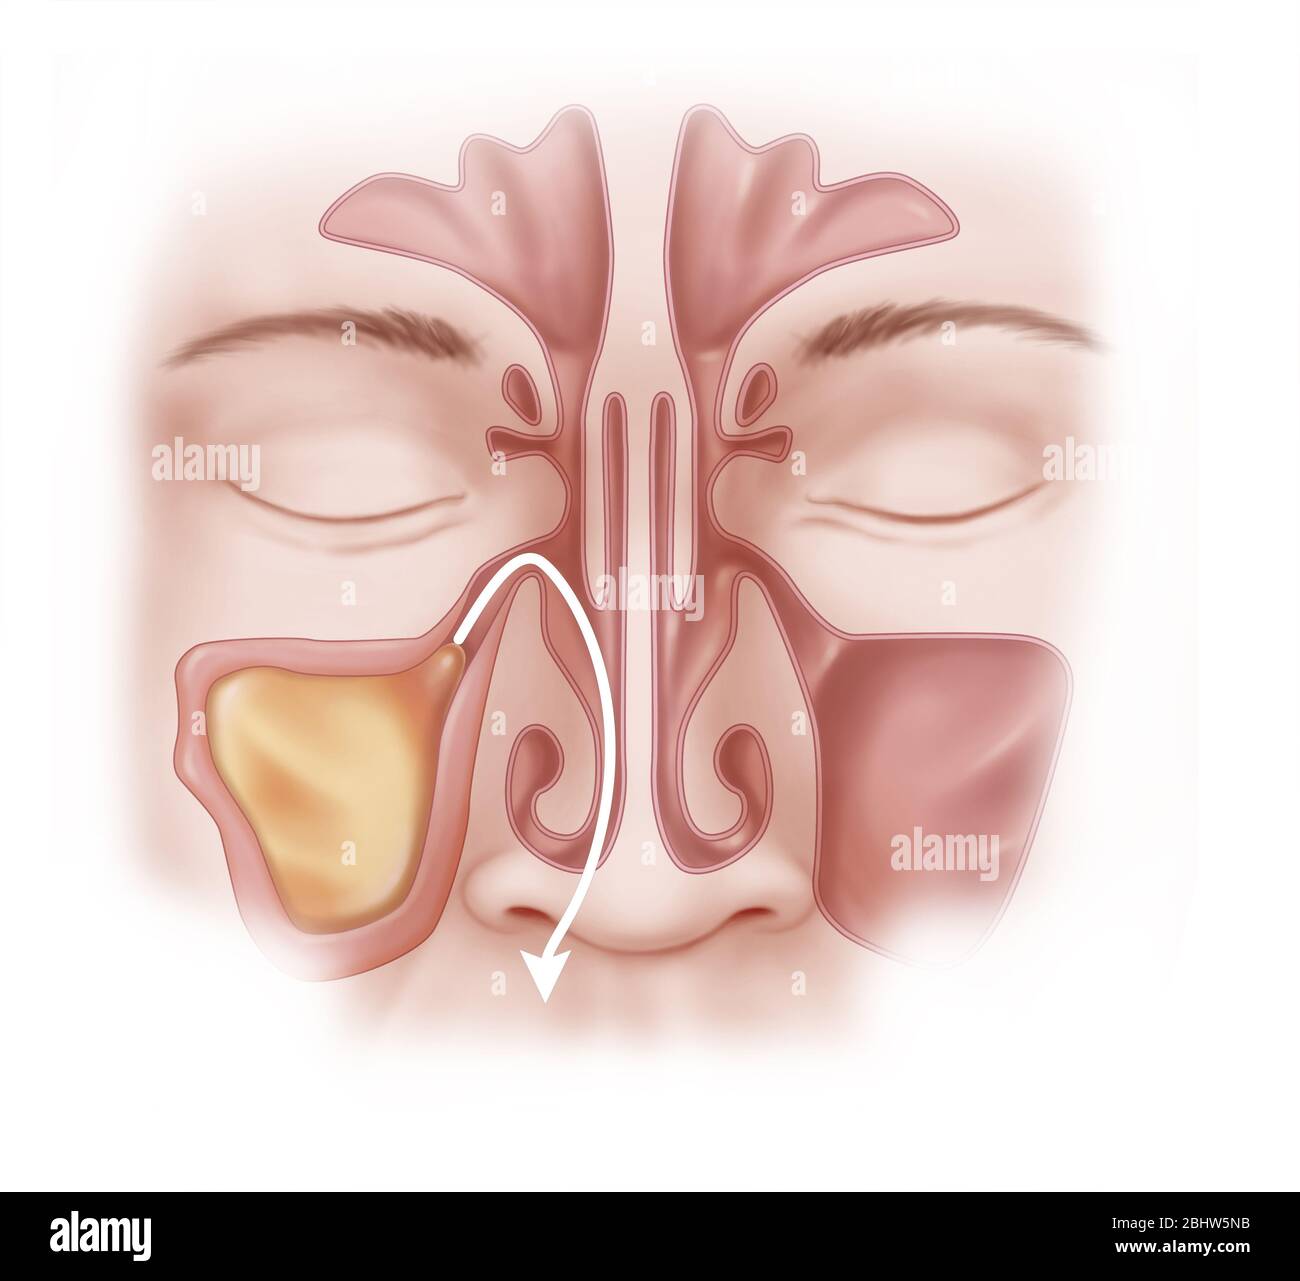 Sinusitis of the right maxillary sinus. The sinus is filled with mucus and the wall is inflamed and thickened. The different para-nasal sinuses are al Stock Photo